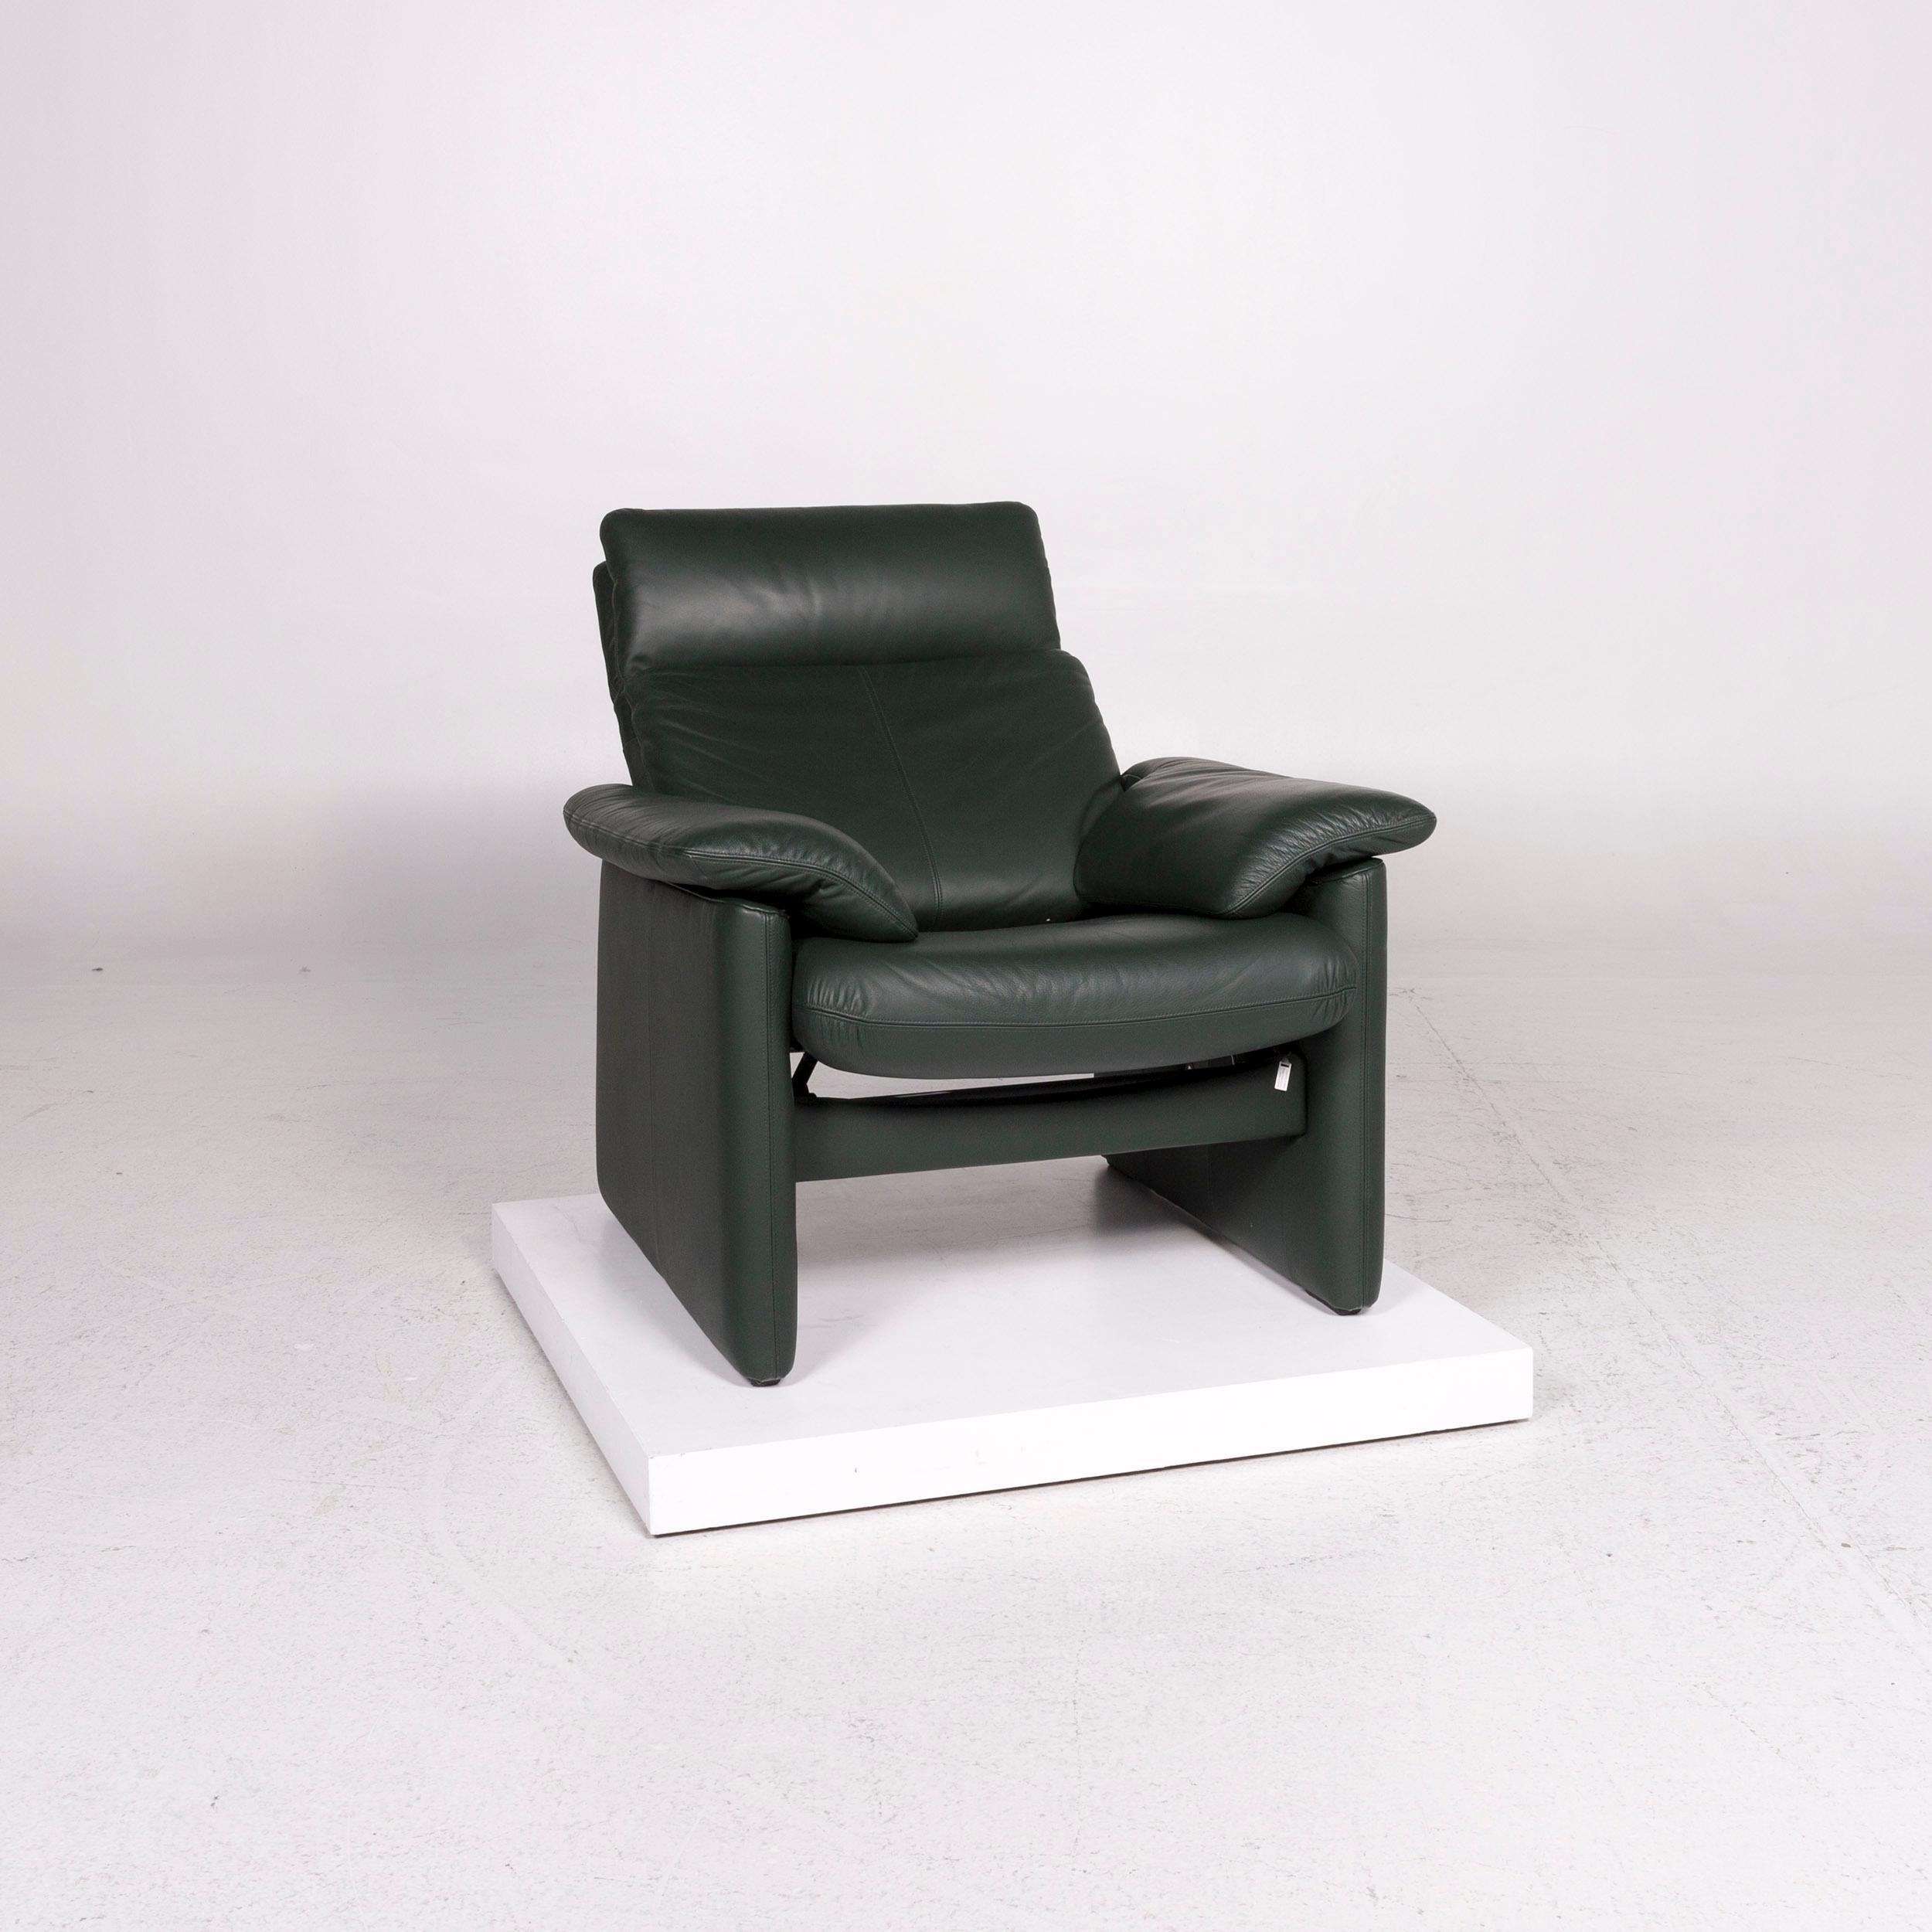 We bring to you an Erpo leather armchair green function relax function.
 

Product measurements in centimetres:
 

Depth 84
Width 88
Height 62
Seat-height 42
Rest-height 58
Seat-depth 50
Seat-width 36
Back-height 44.
  